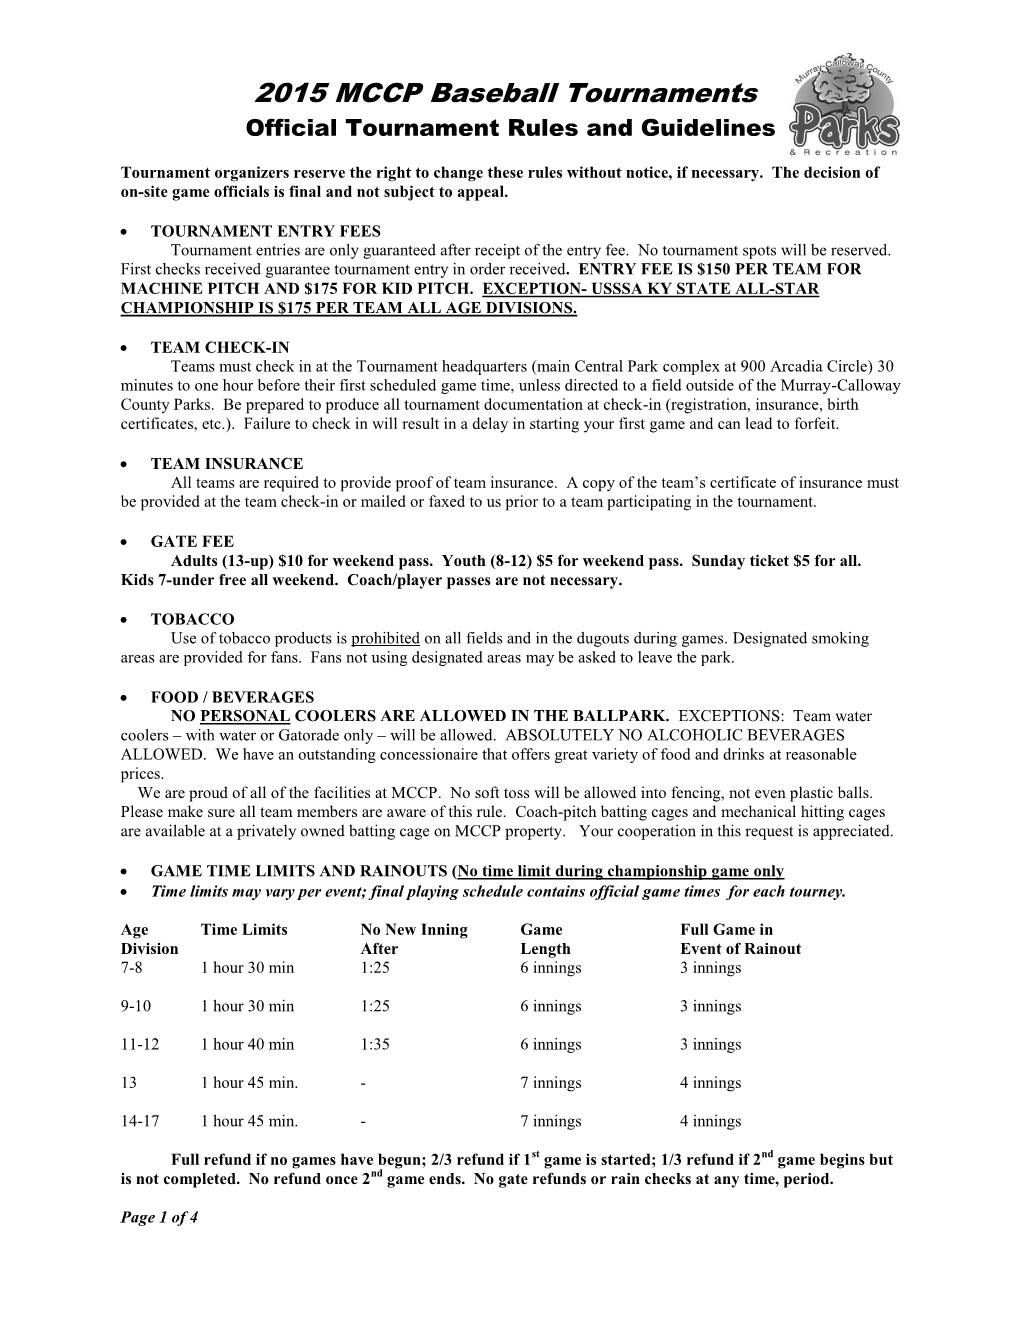 2015 MCCP Baseball Tournaments Official Tournament Rules and Guidelines